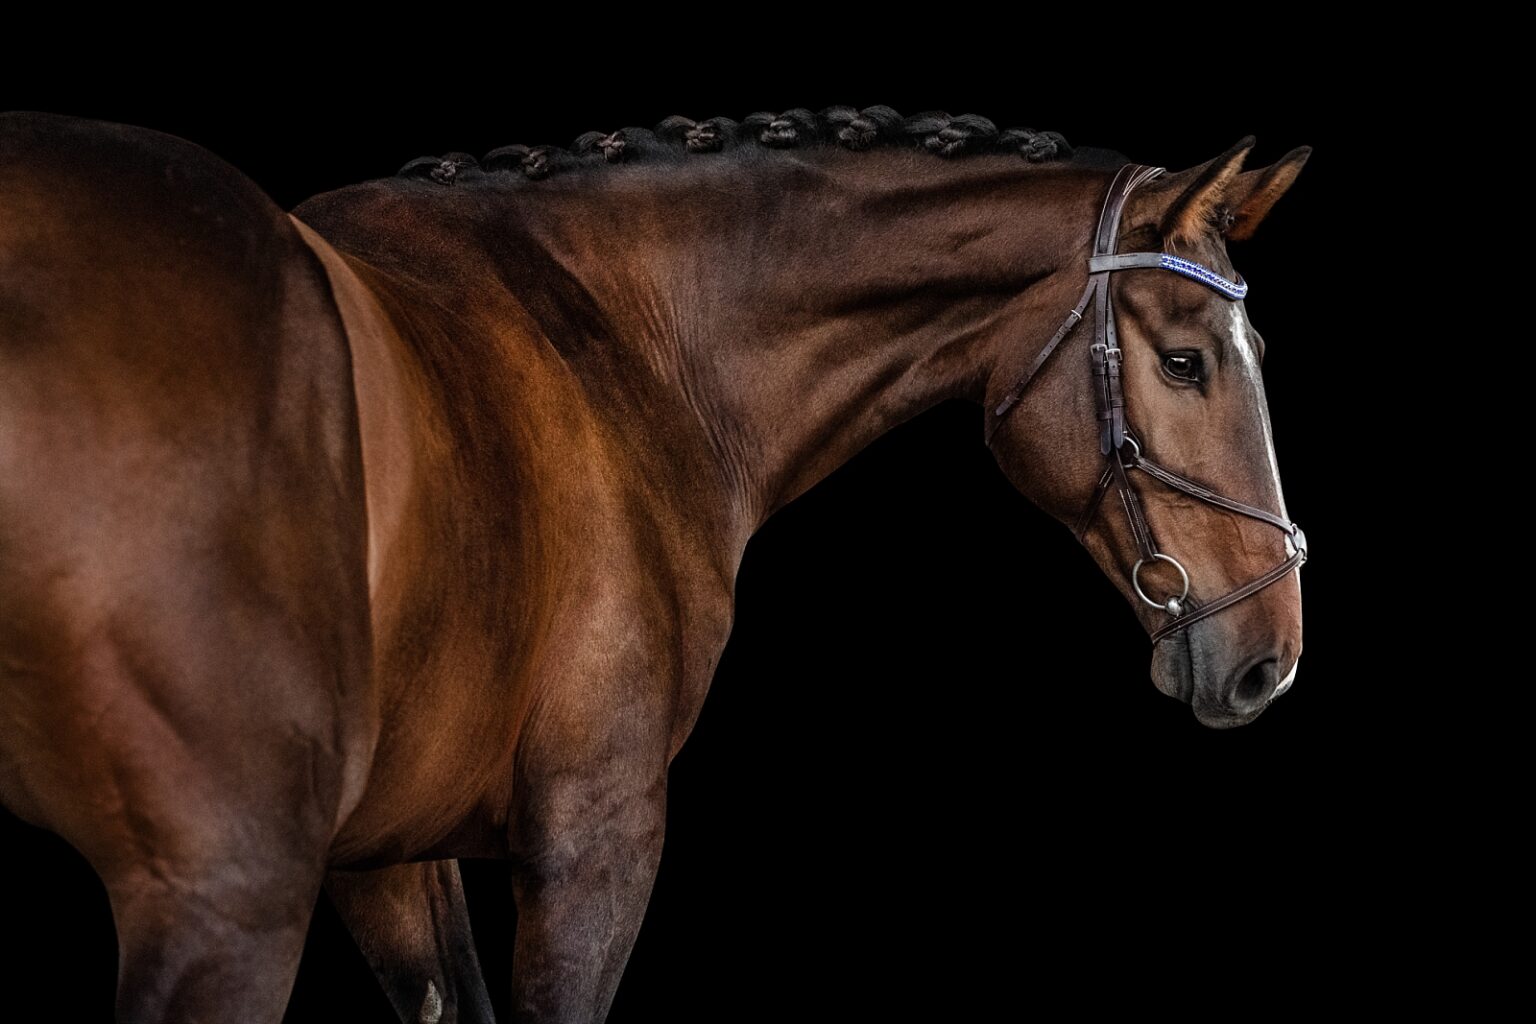 Quirador, photographed at Little Star Stables, Graceville, FL.